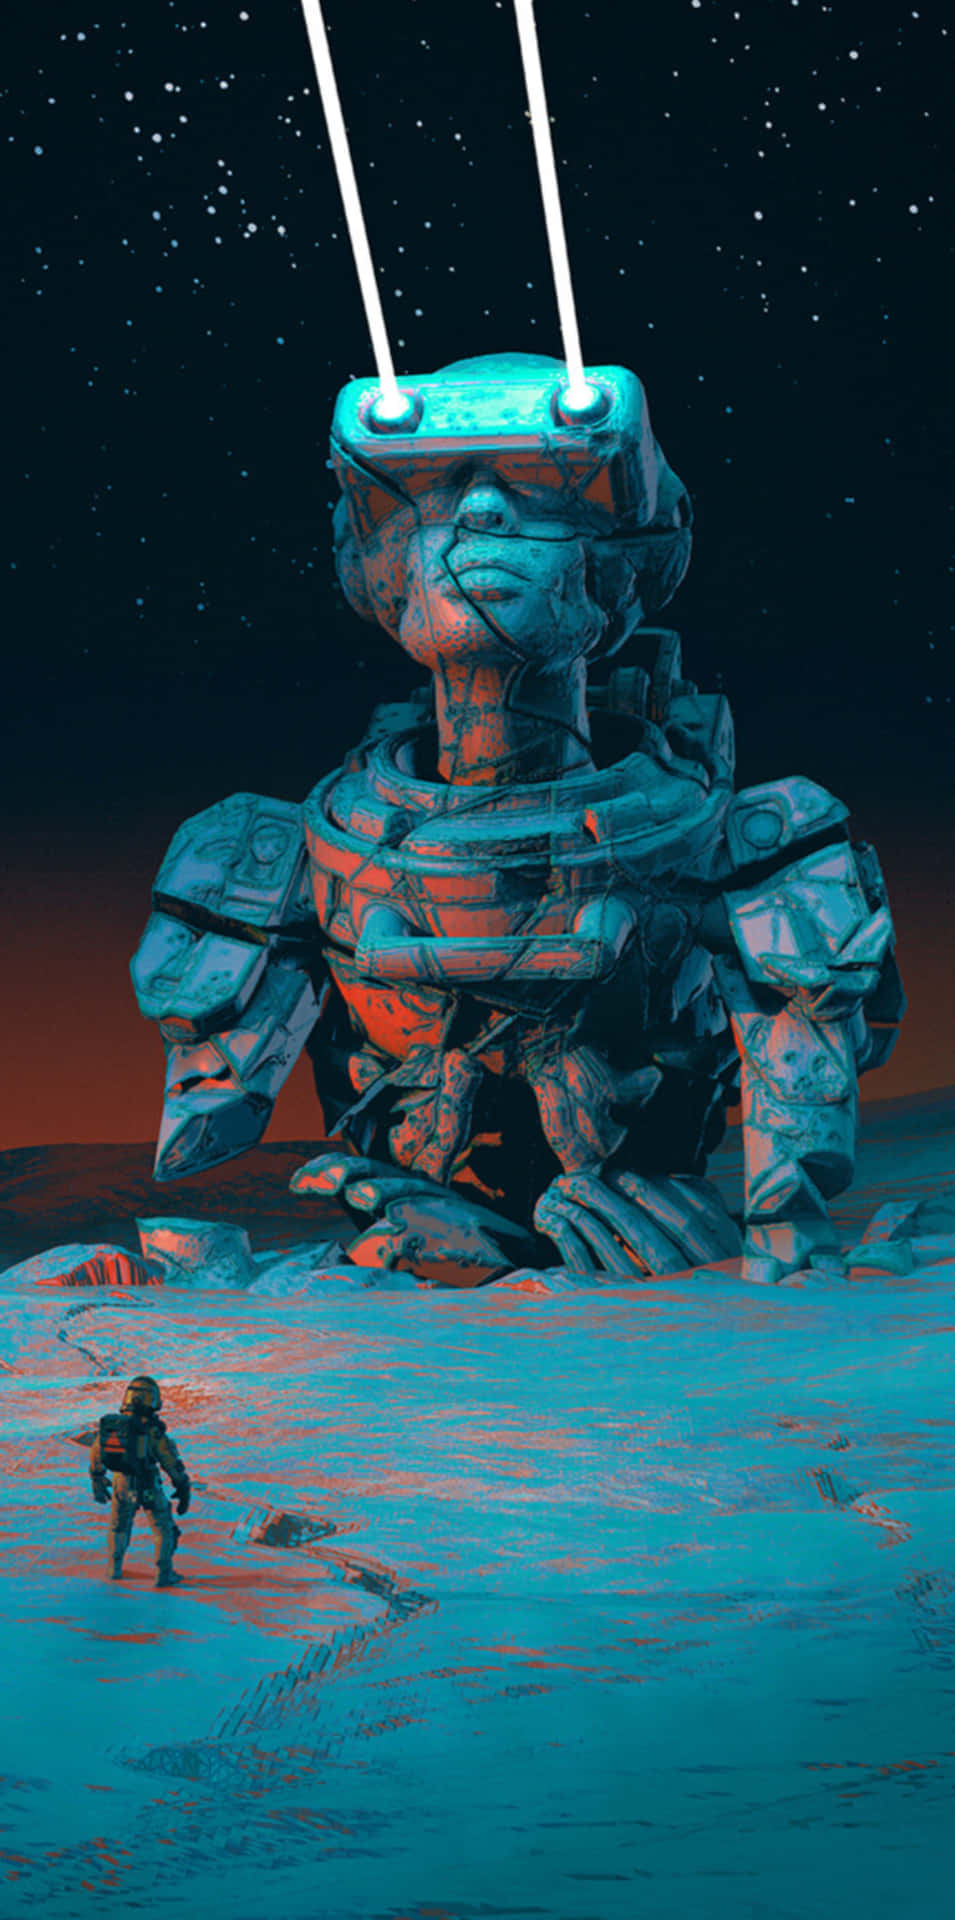 A Man Is Standing In Front Of A Robot In The Desert Wallpaper